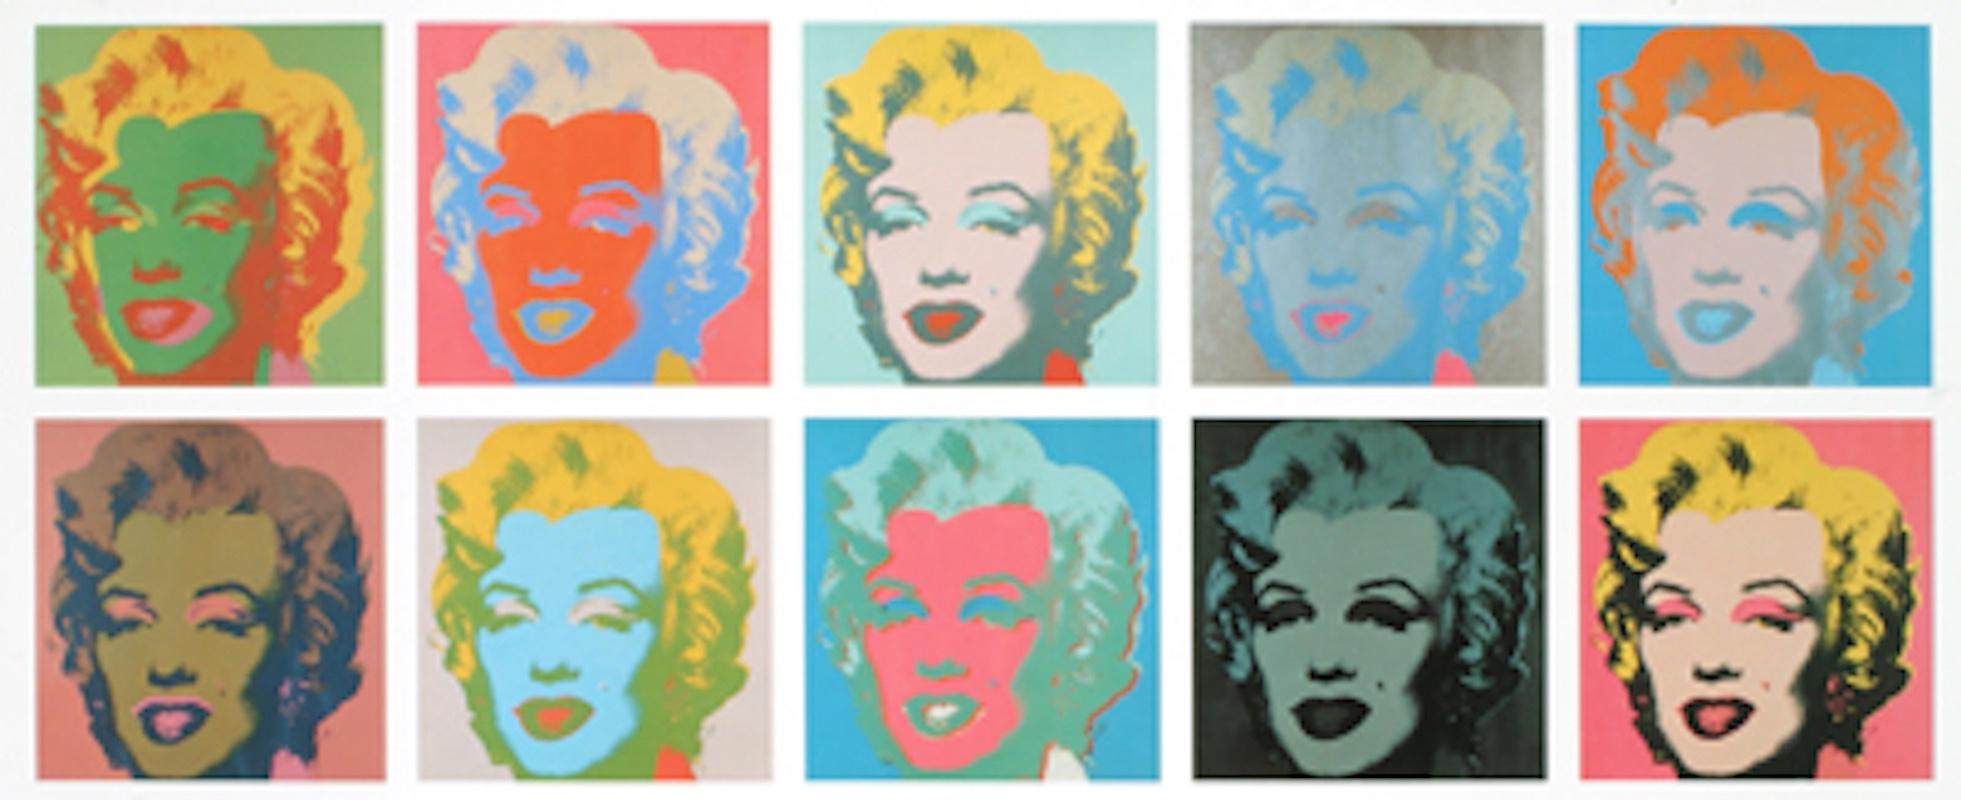 10 Marilyns - Print by (after) Andy Warhol